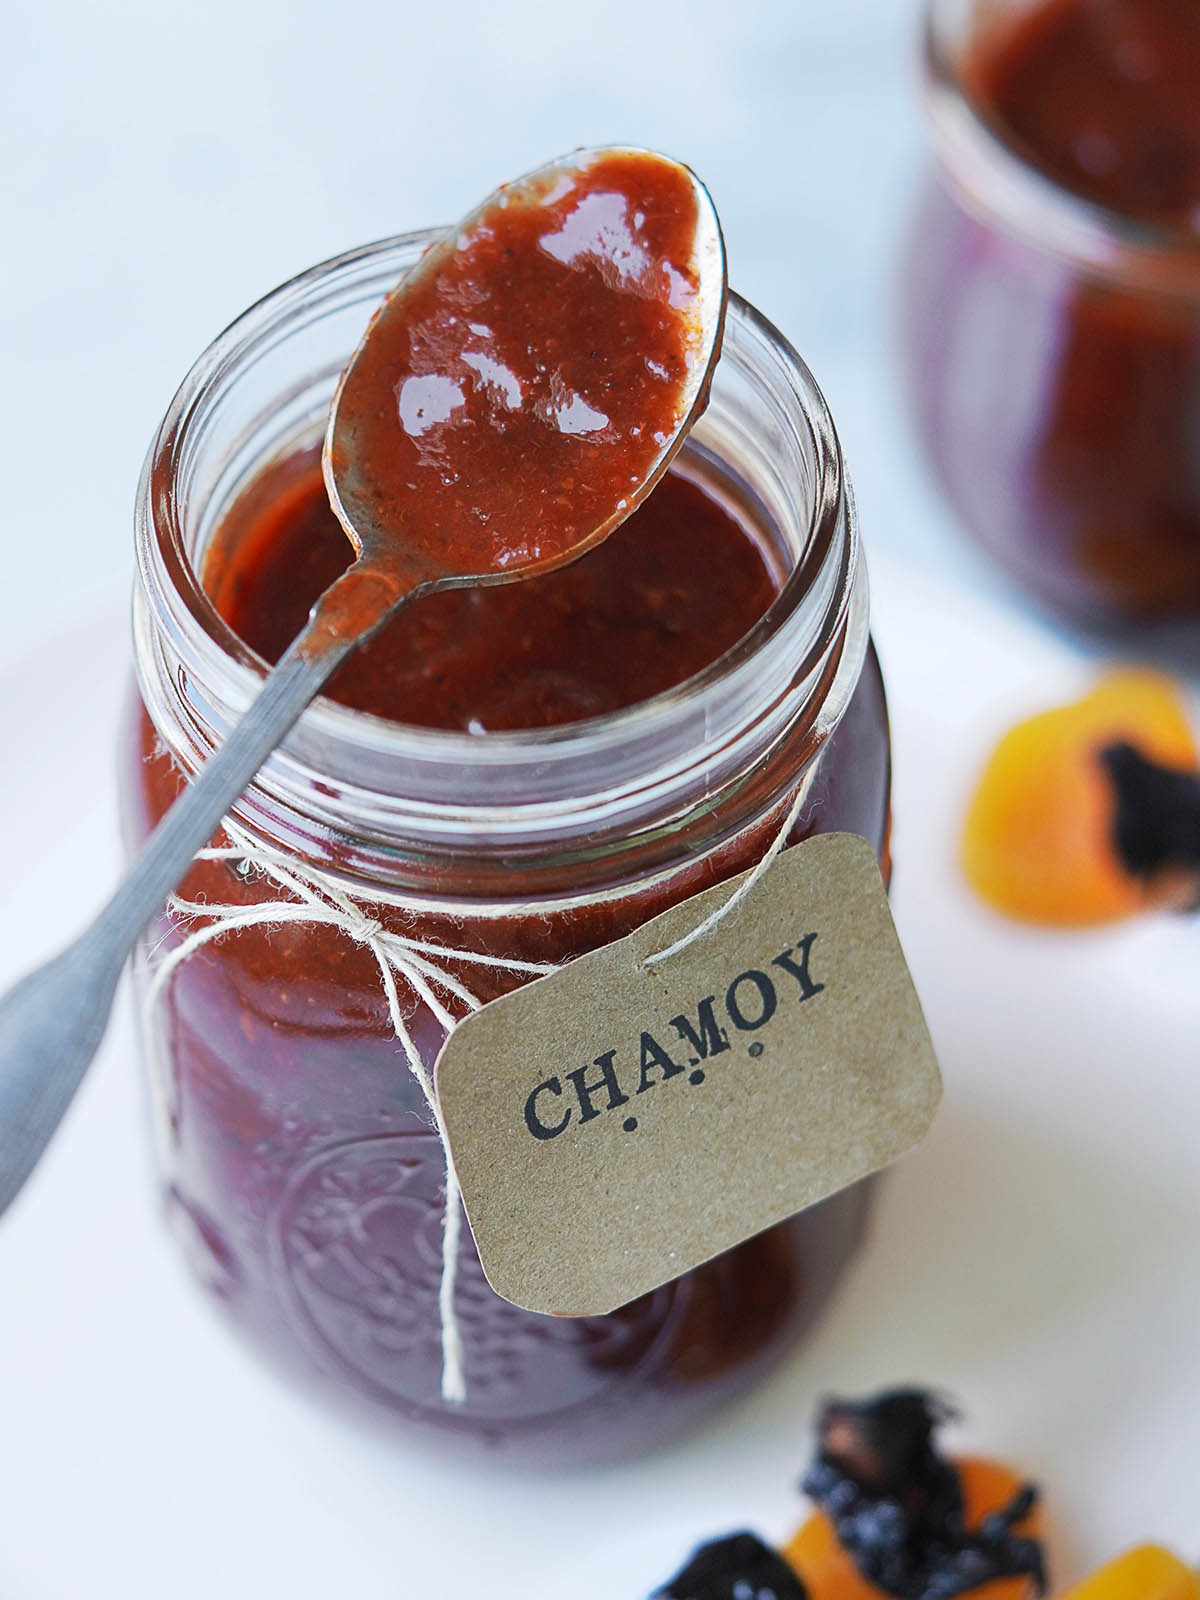 Chamoy on a spoon with a jar and a Chamoy sign.